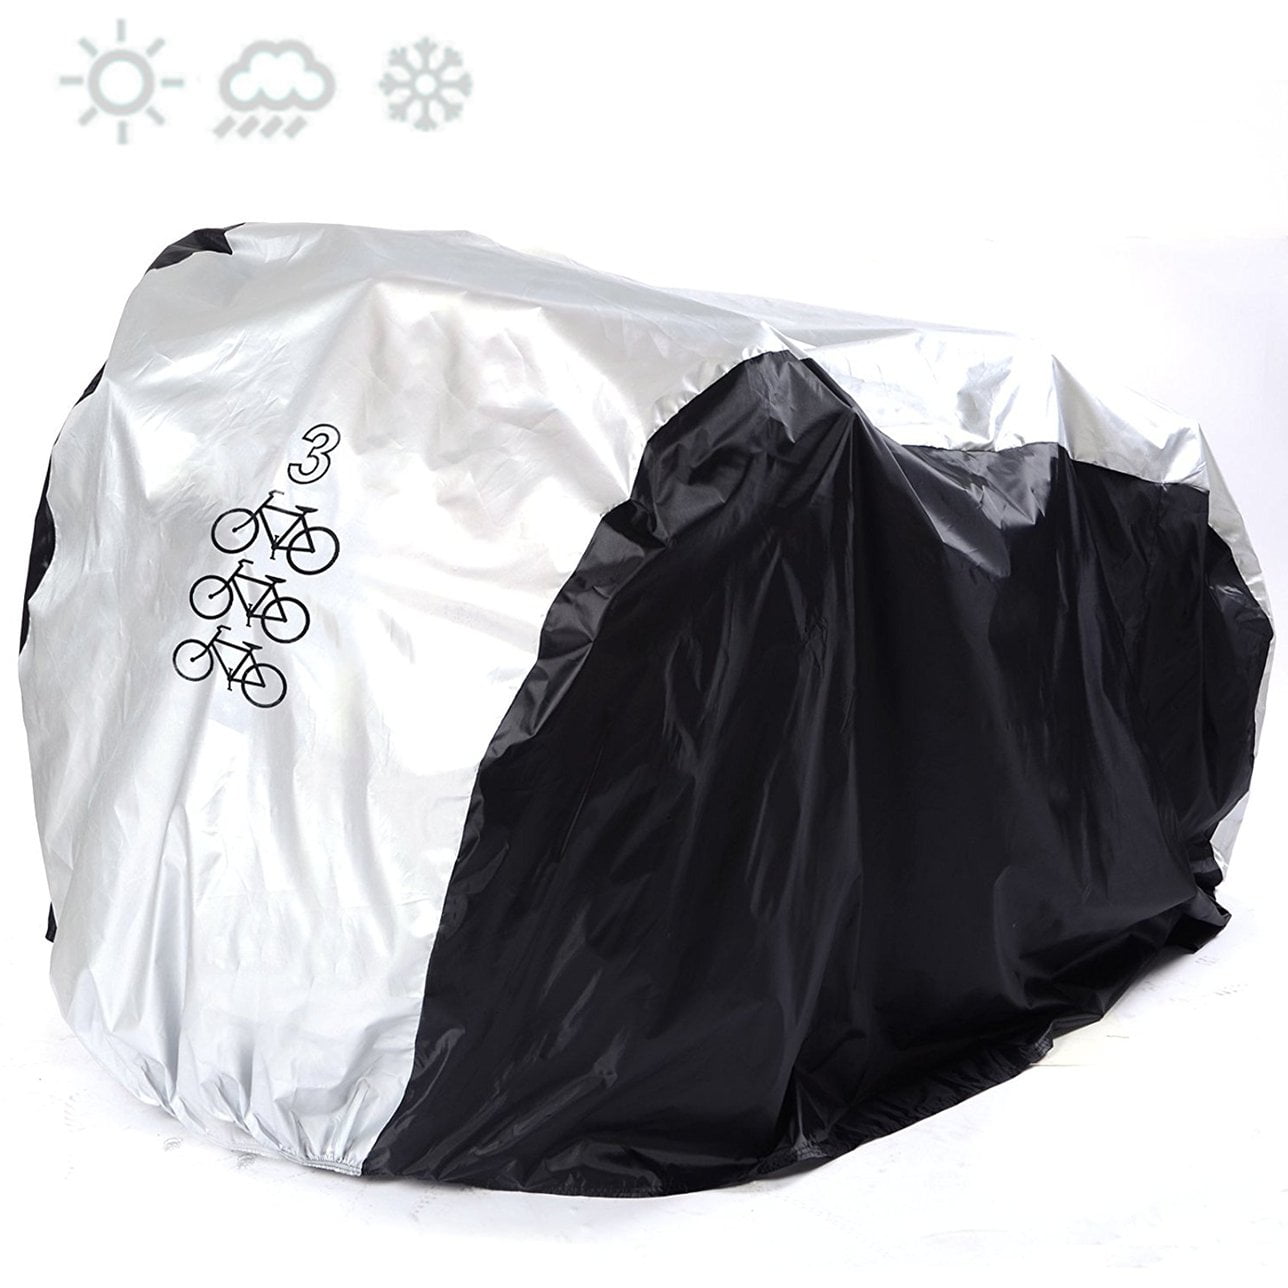 Bike Covers,Bike Covers Outdoor Storage Waterproof,210D Tear-Proof and Double Seamed Heat Sealing Material Anti-Sun Snow and dust,Suitable for Covering Two 29 Bikes. 